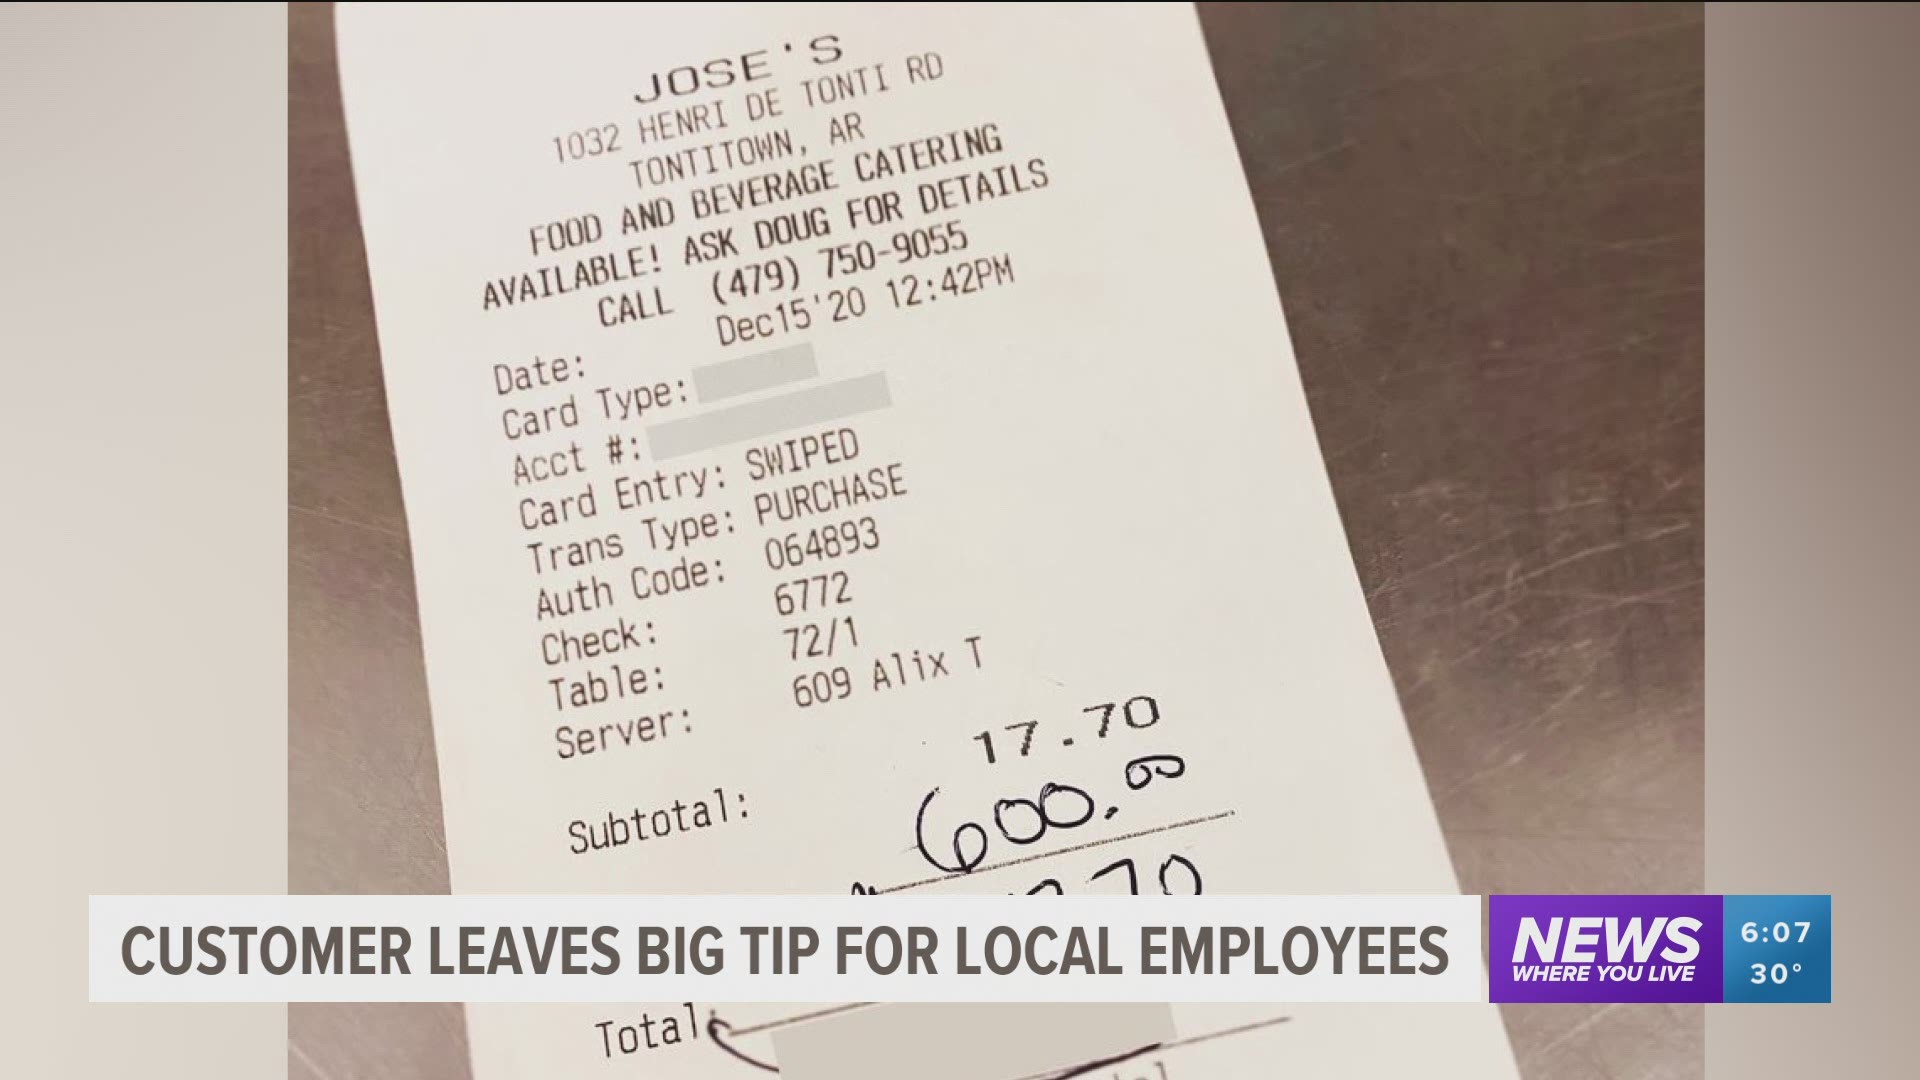 A man who is a regular customer at Jose's Bar and Grill in Tontitown visited for lunch Tuesday and left a $600 tip on his $17 check.